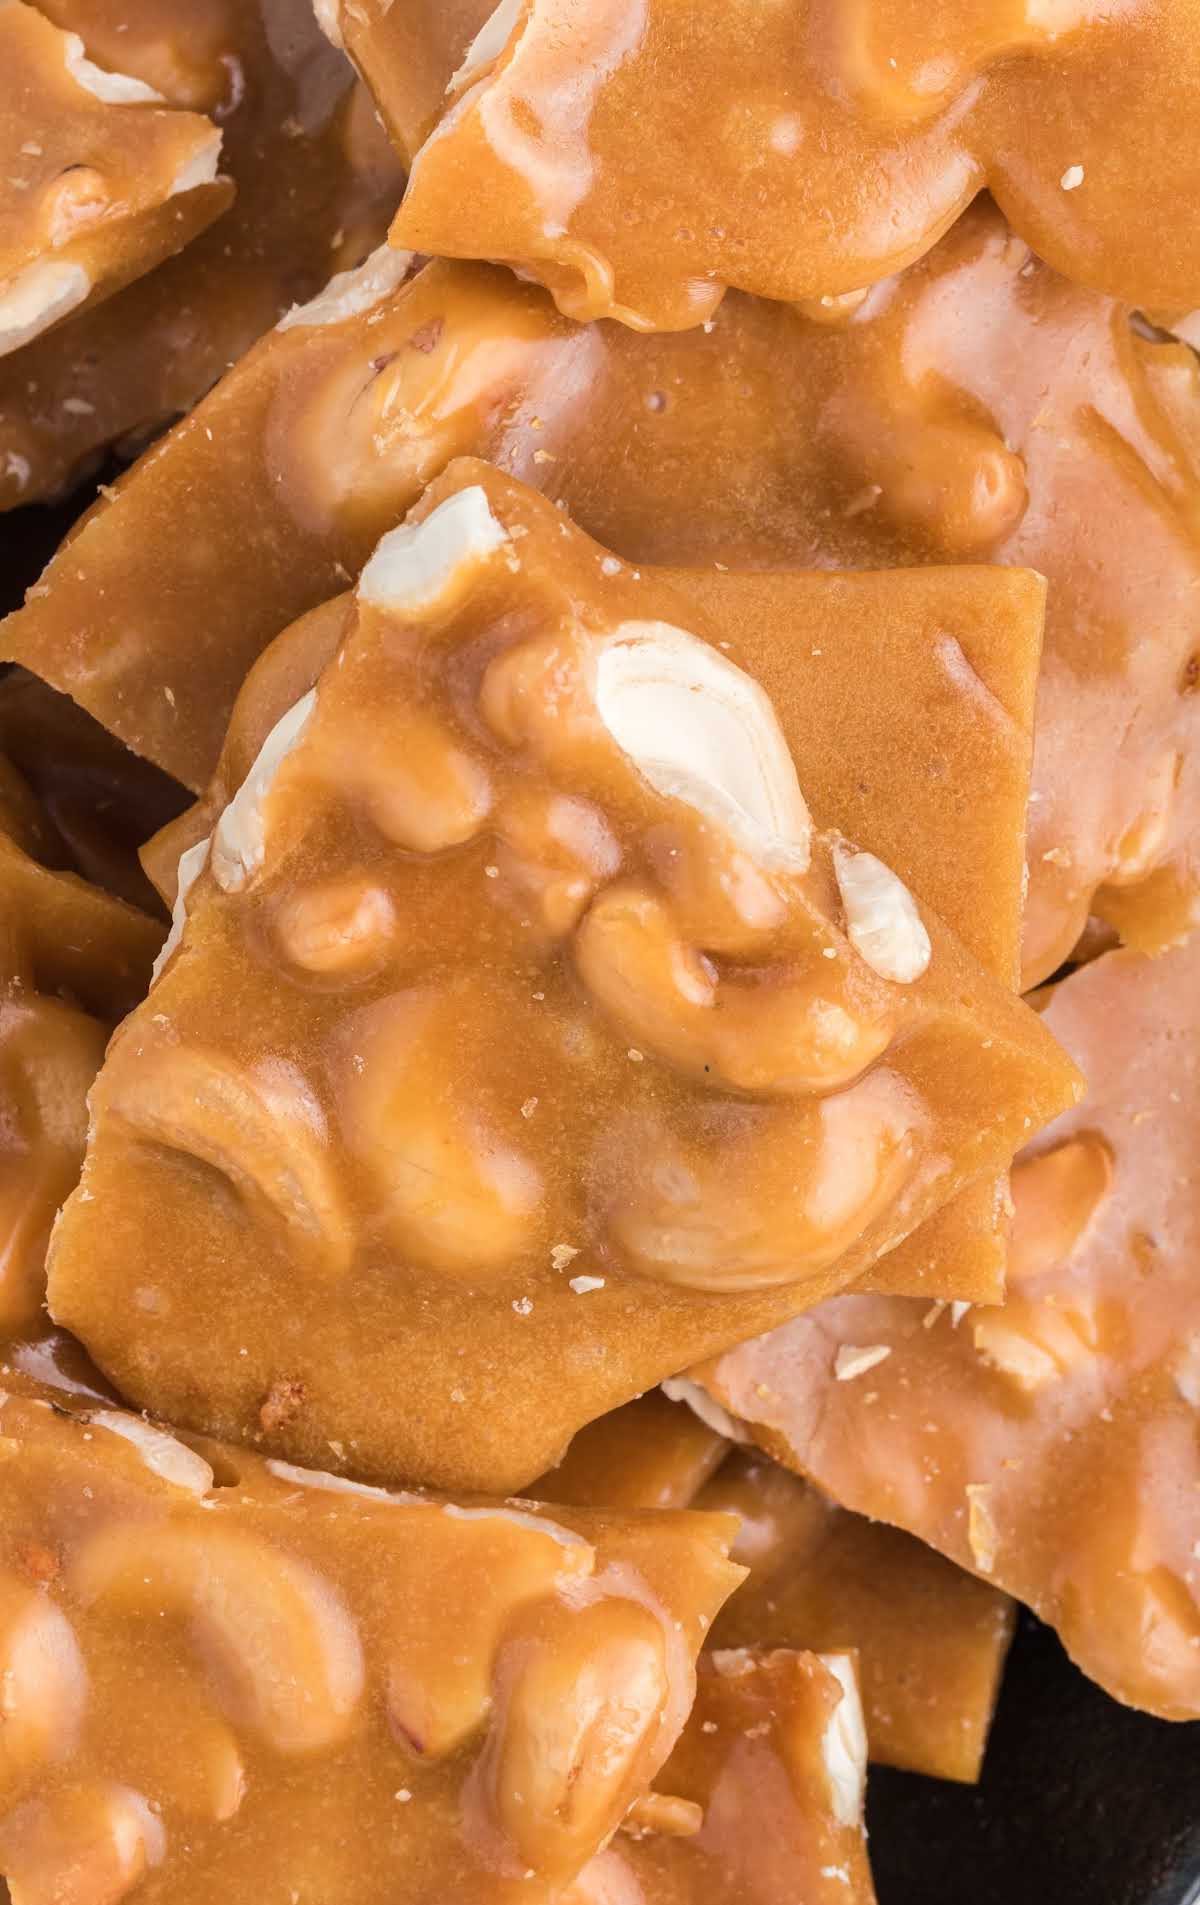 A close up of food, with Cashew brittle and Peanut